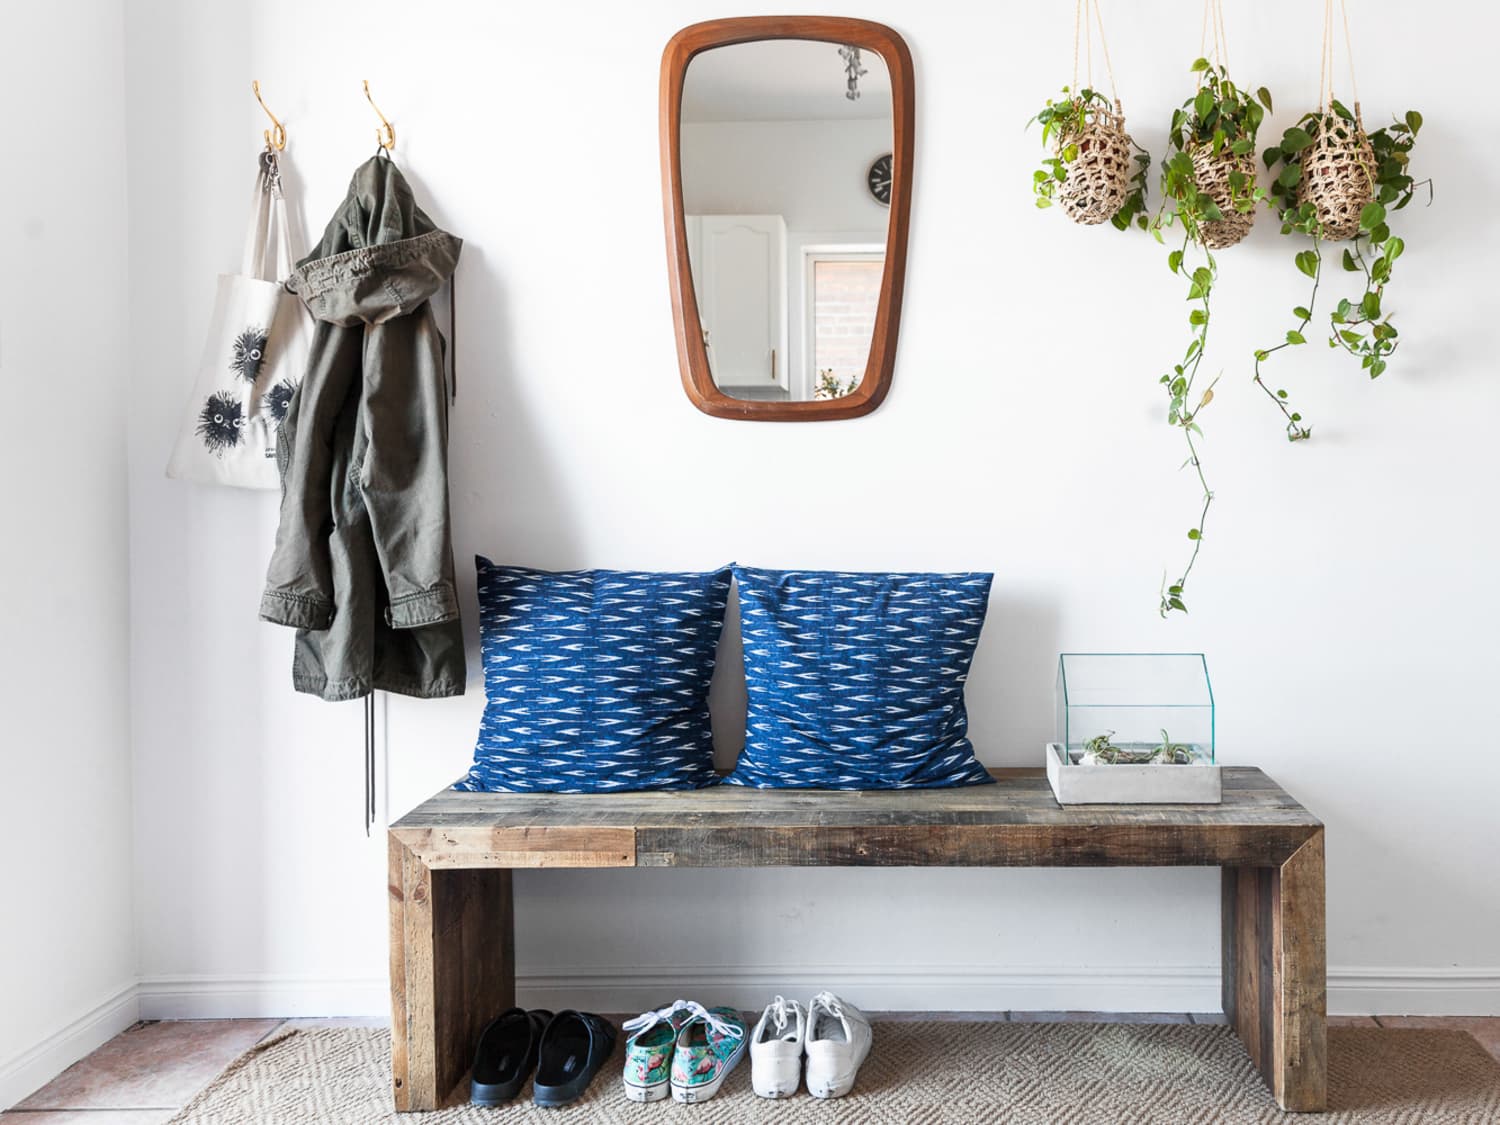 Entryway Shoe Storage That's Functional